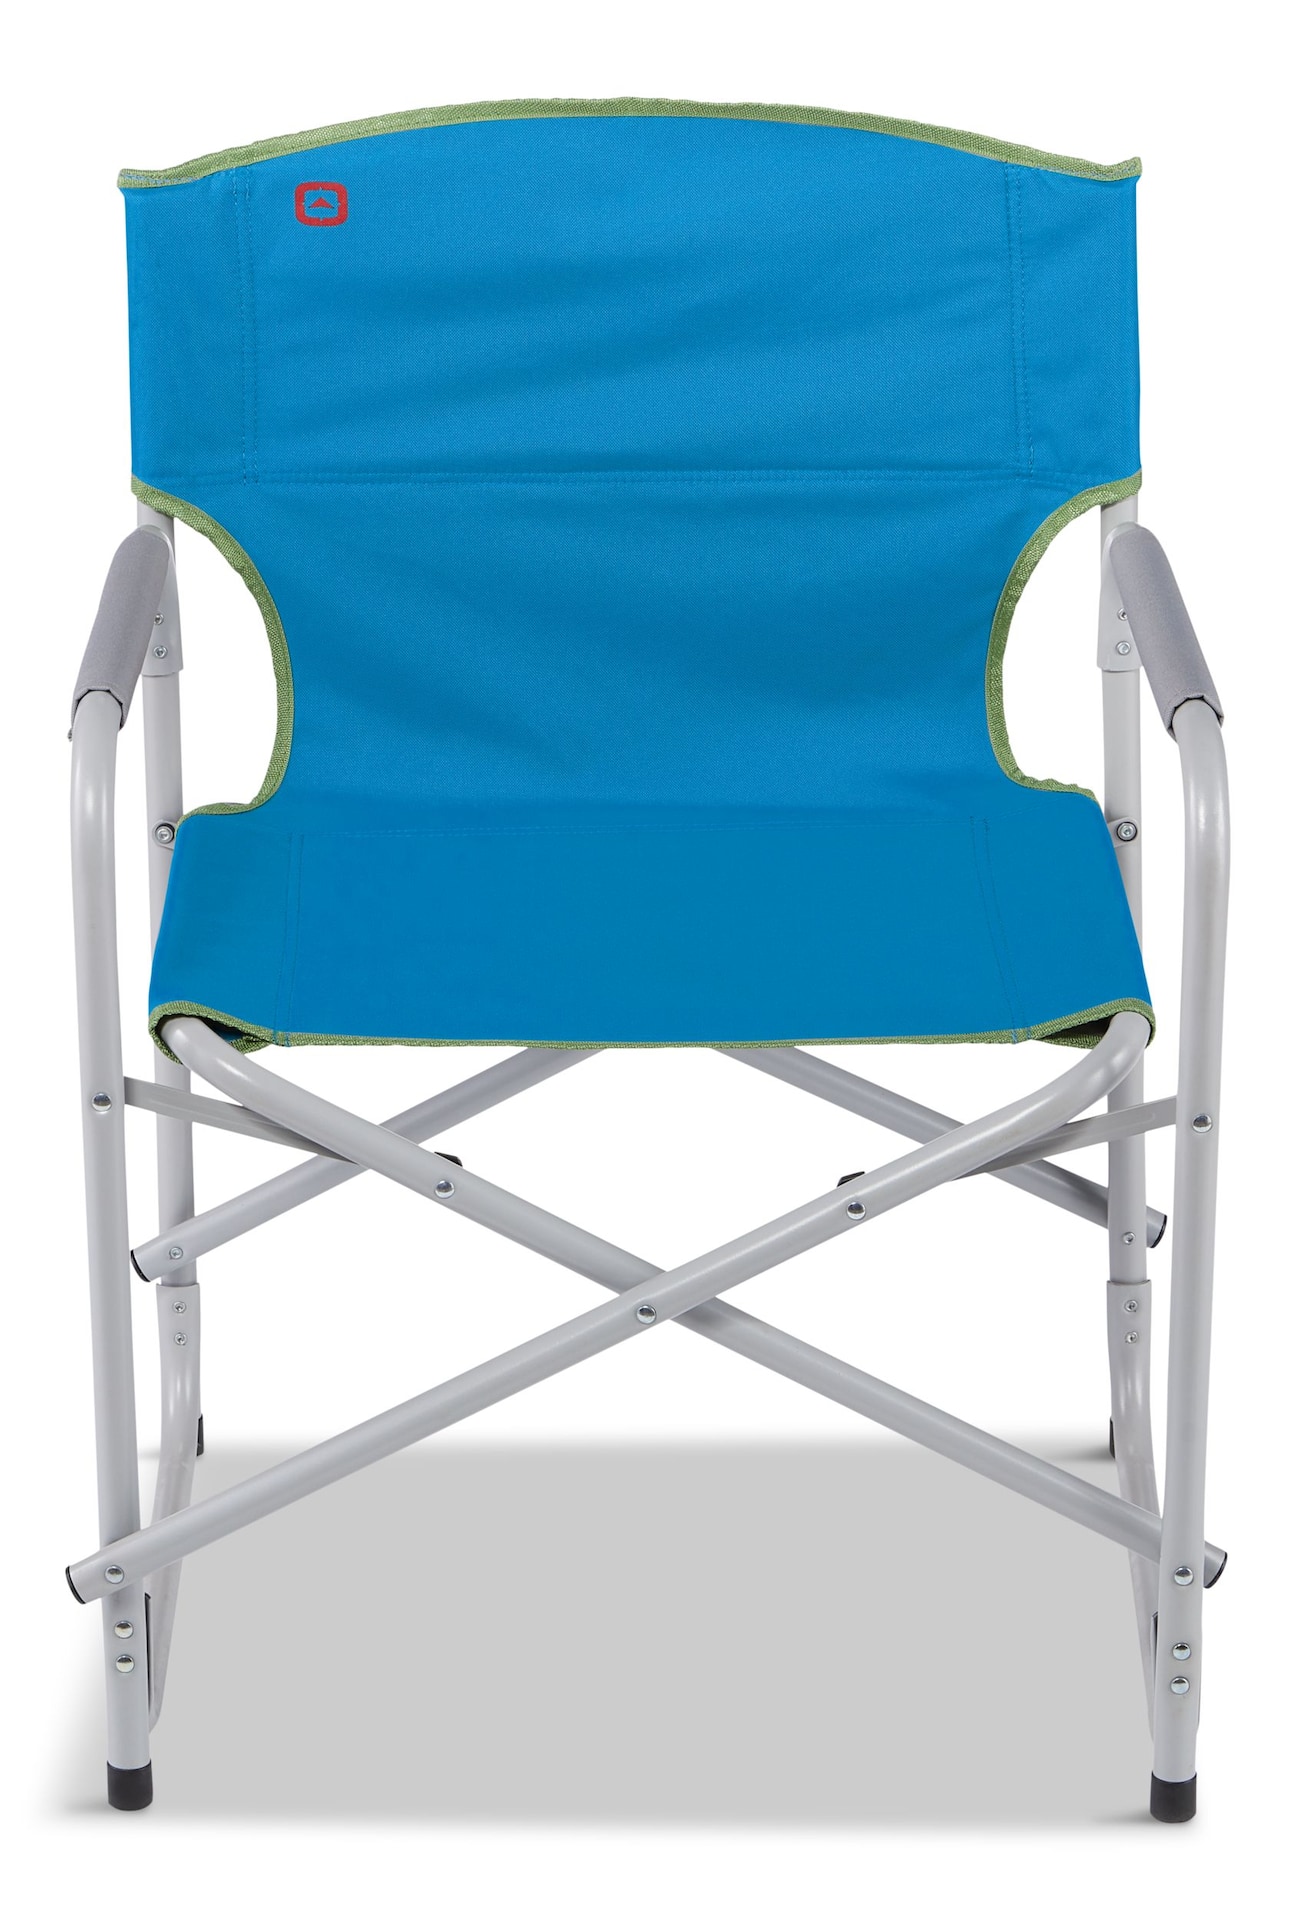 Outbound Director's Portable Folding Camping/Beach Chair, Supports